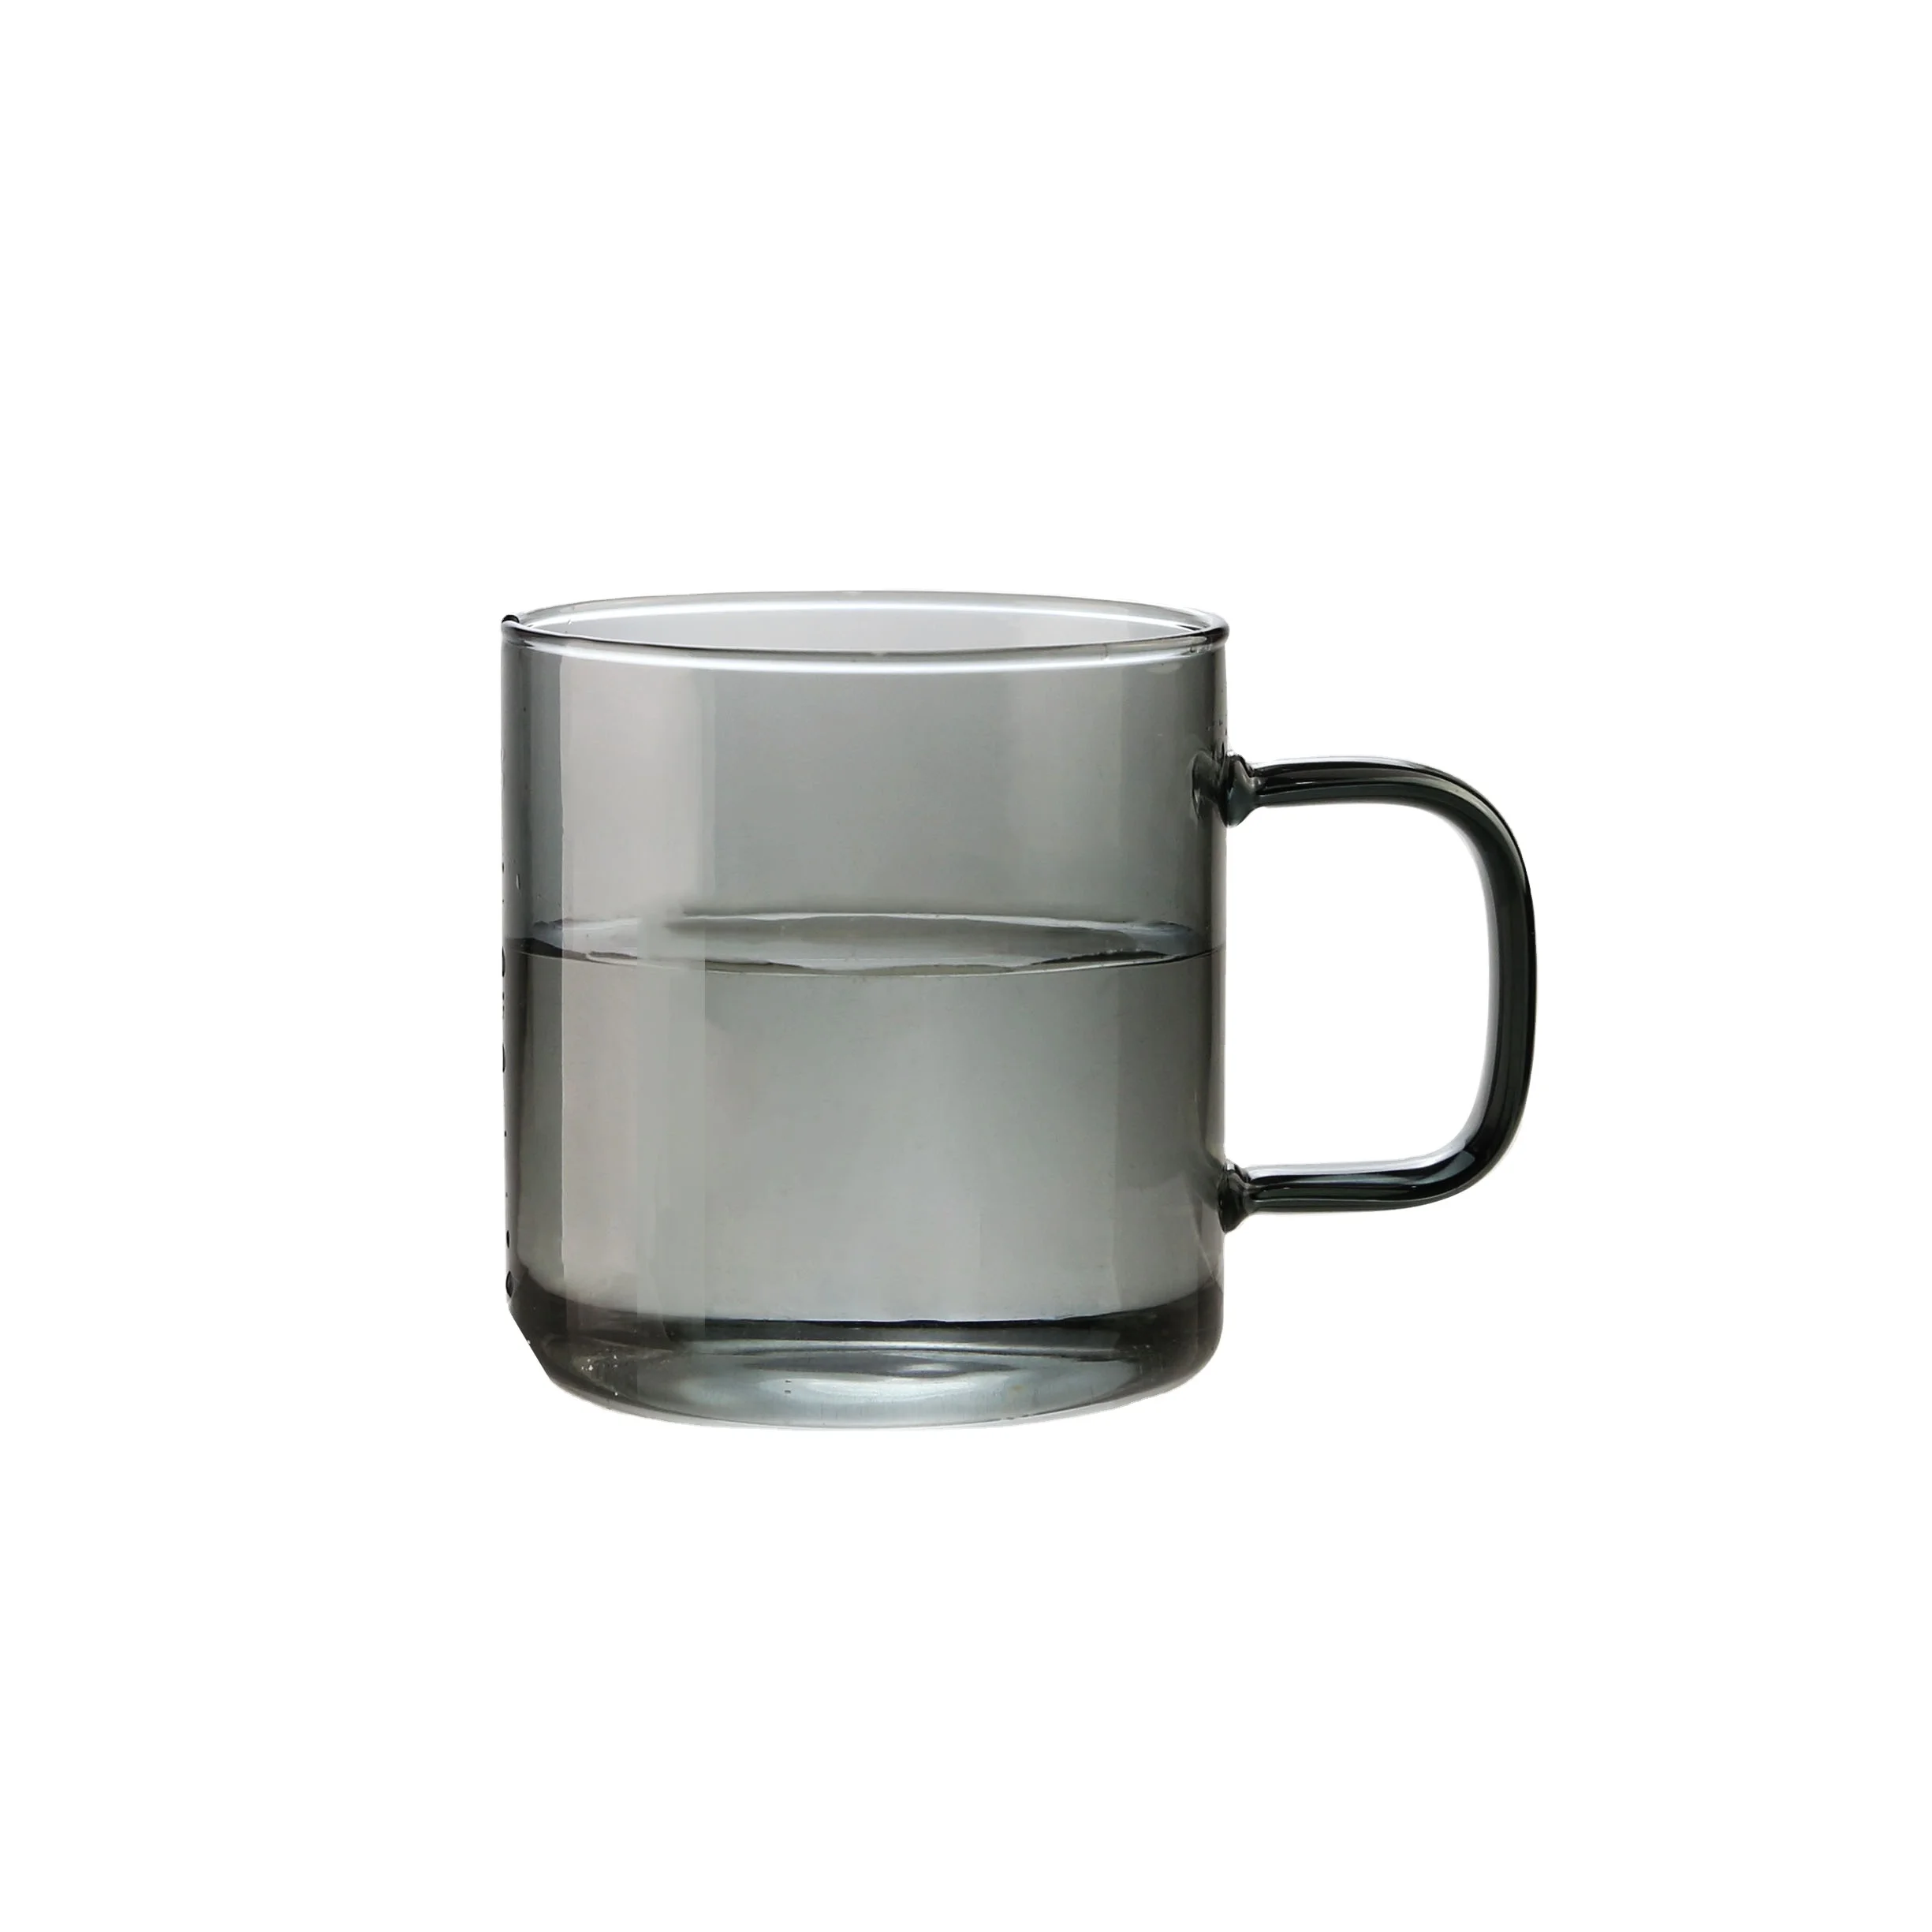 Newly 350ml colored thicken single coffee mug glass cup mug environment friendly cold water cup single wall glass cup